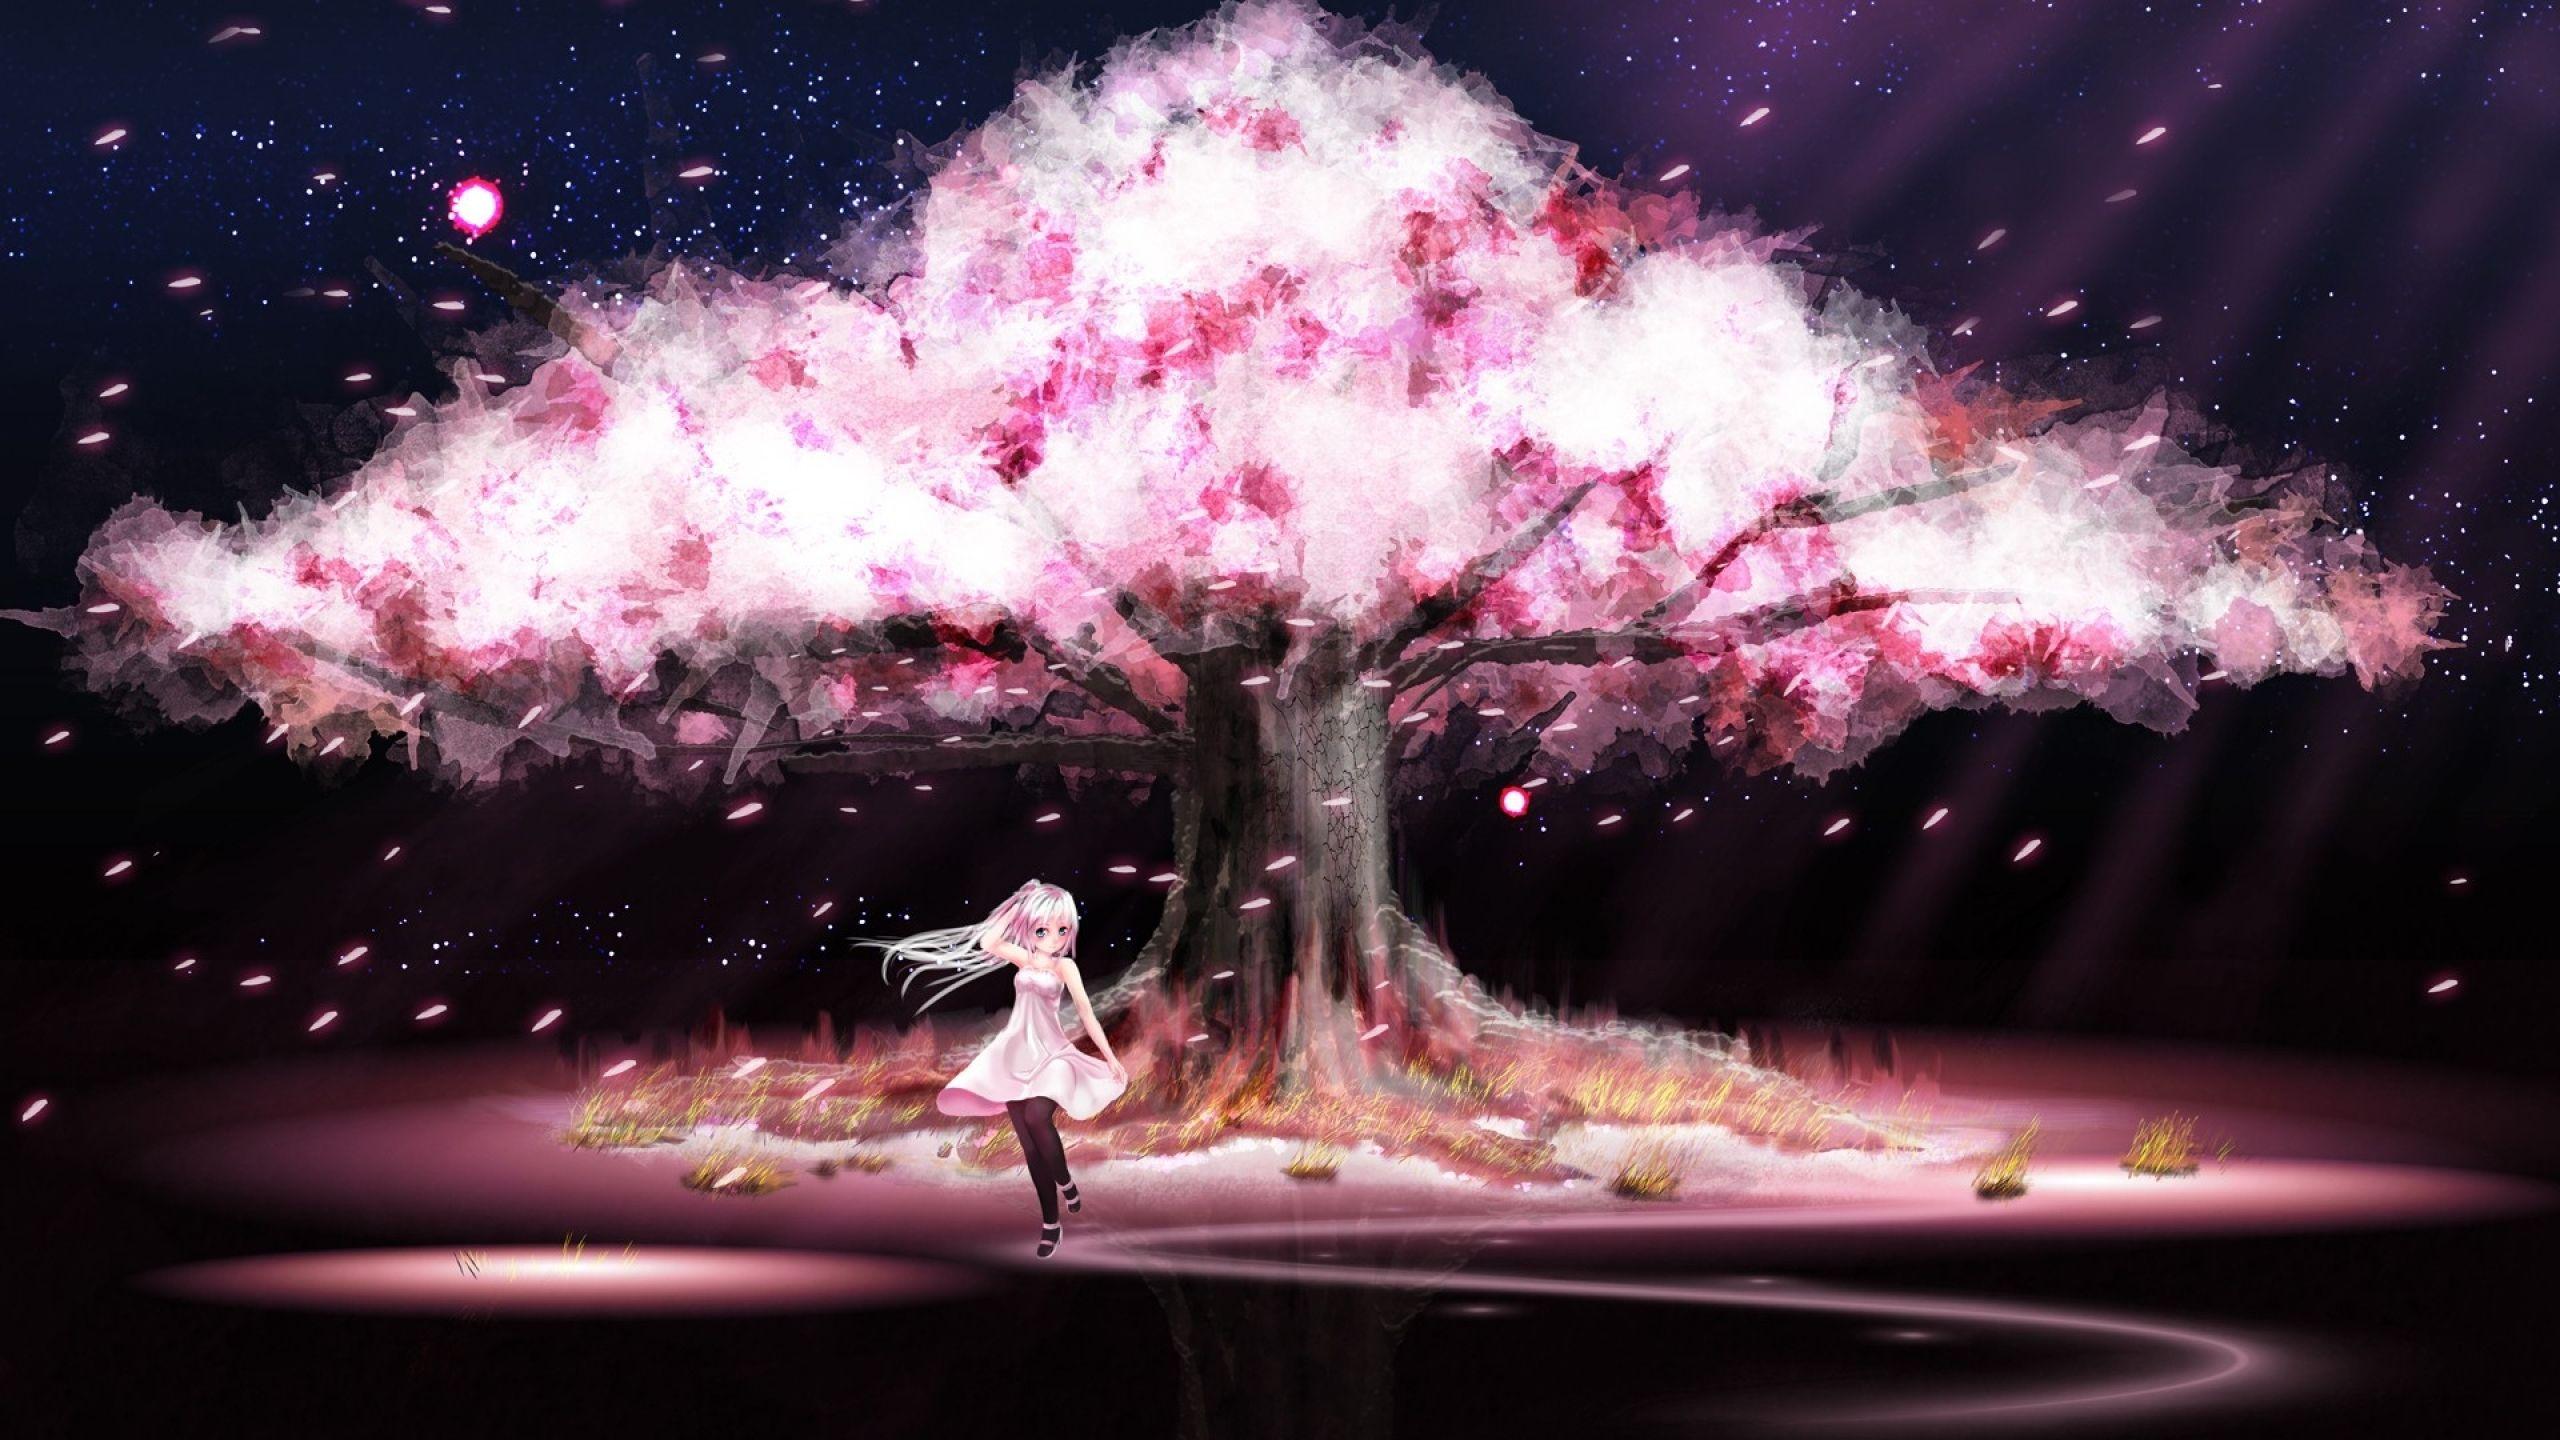 Awesome pink cherry blossom tree wallpaper image. Cherry blossom wallpaper, Anime cherry blossom, Cherry blossom tree